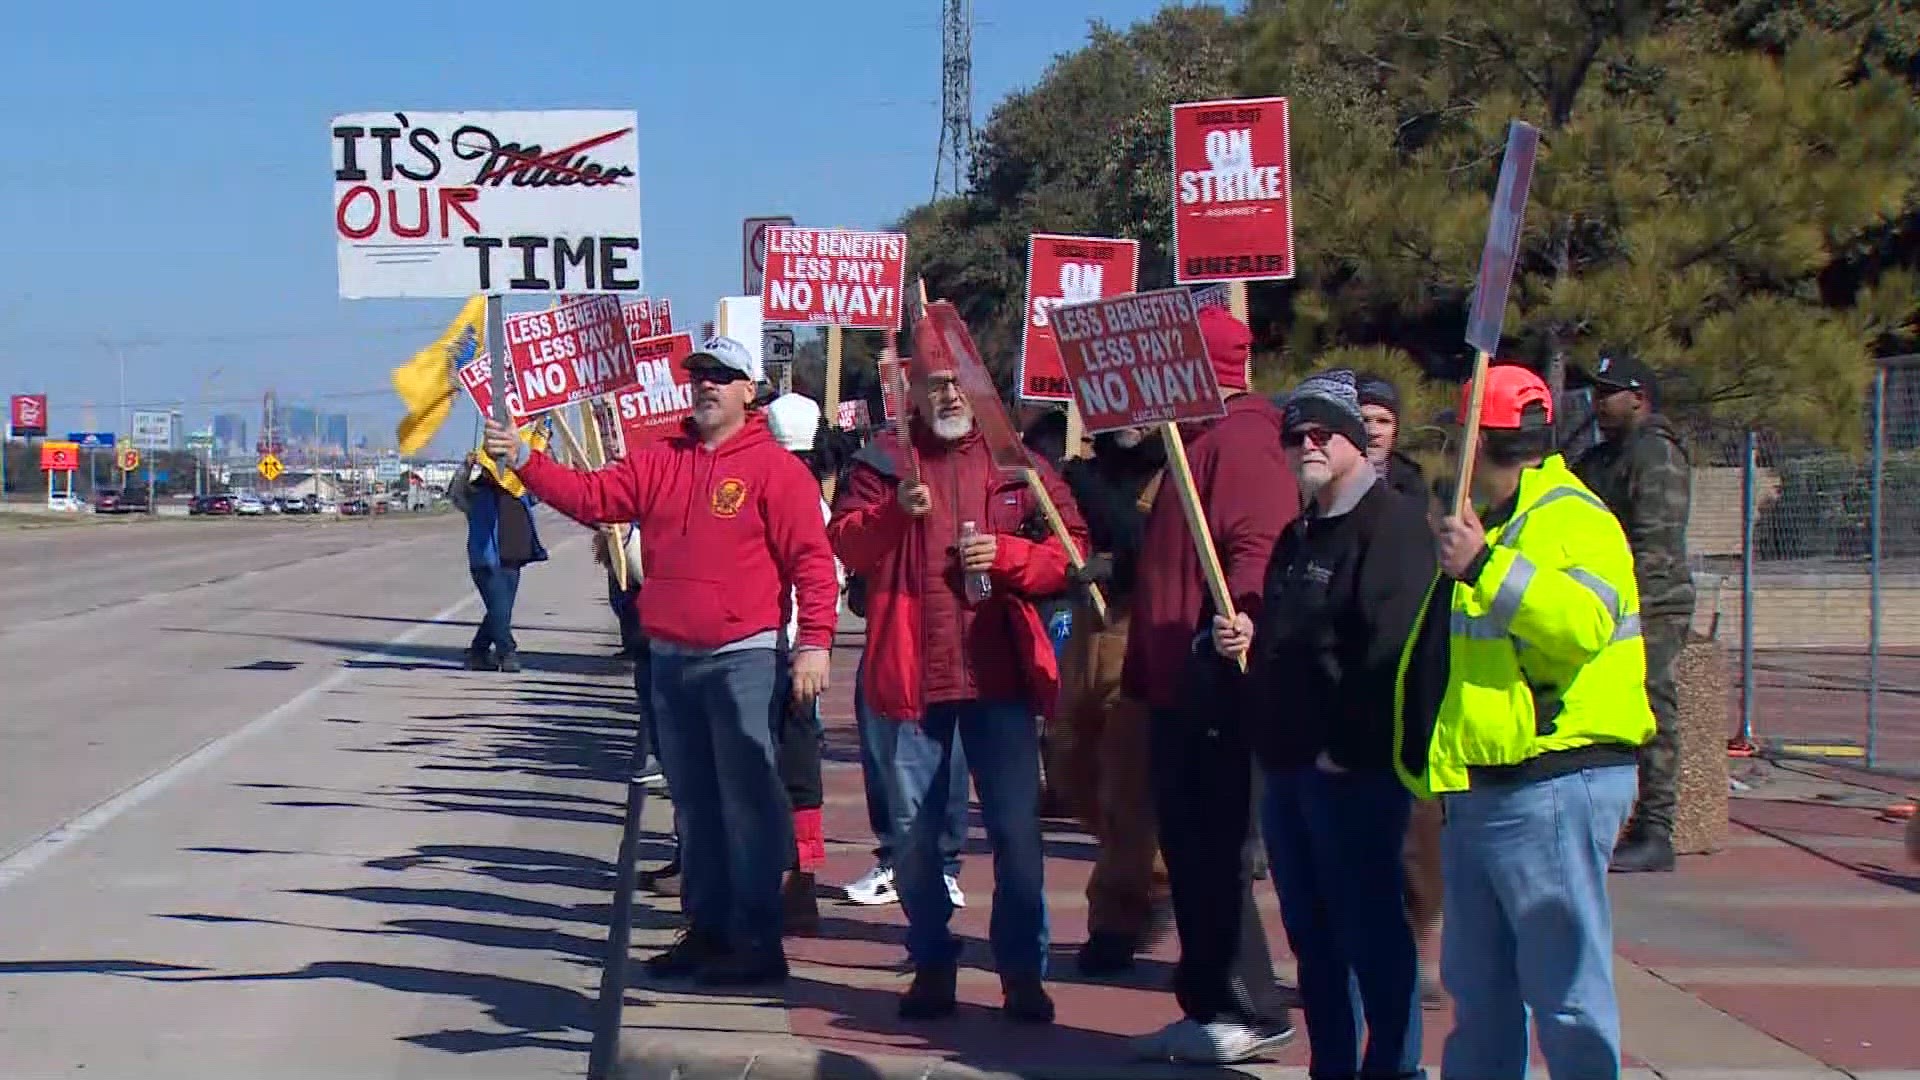 Members of Teamsters Local 997 began picketing outside the brewery after failing to come to terms on a new three-year contract for 420 workers.